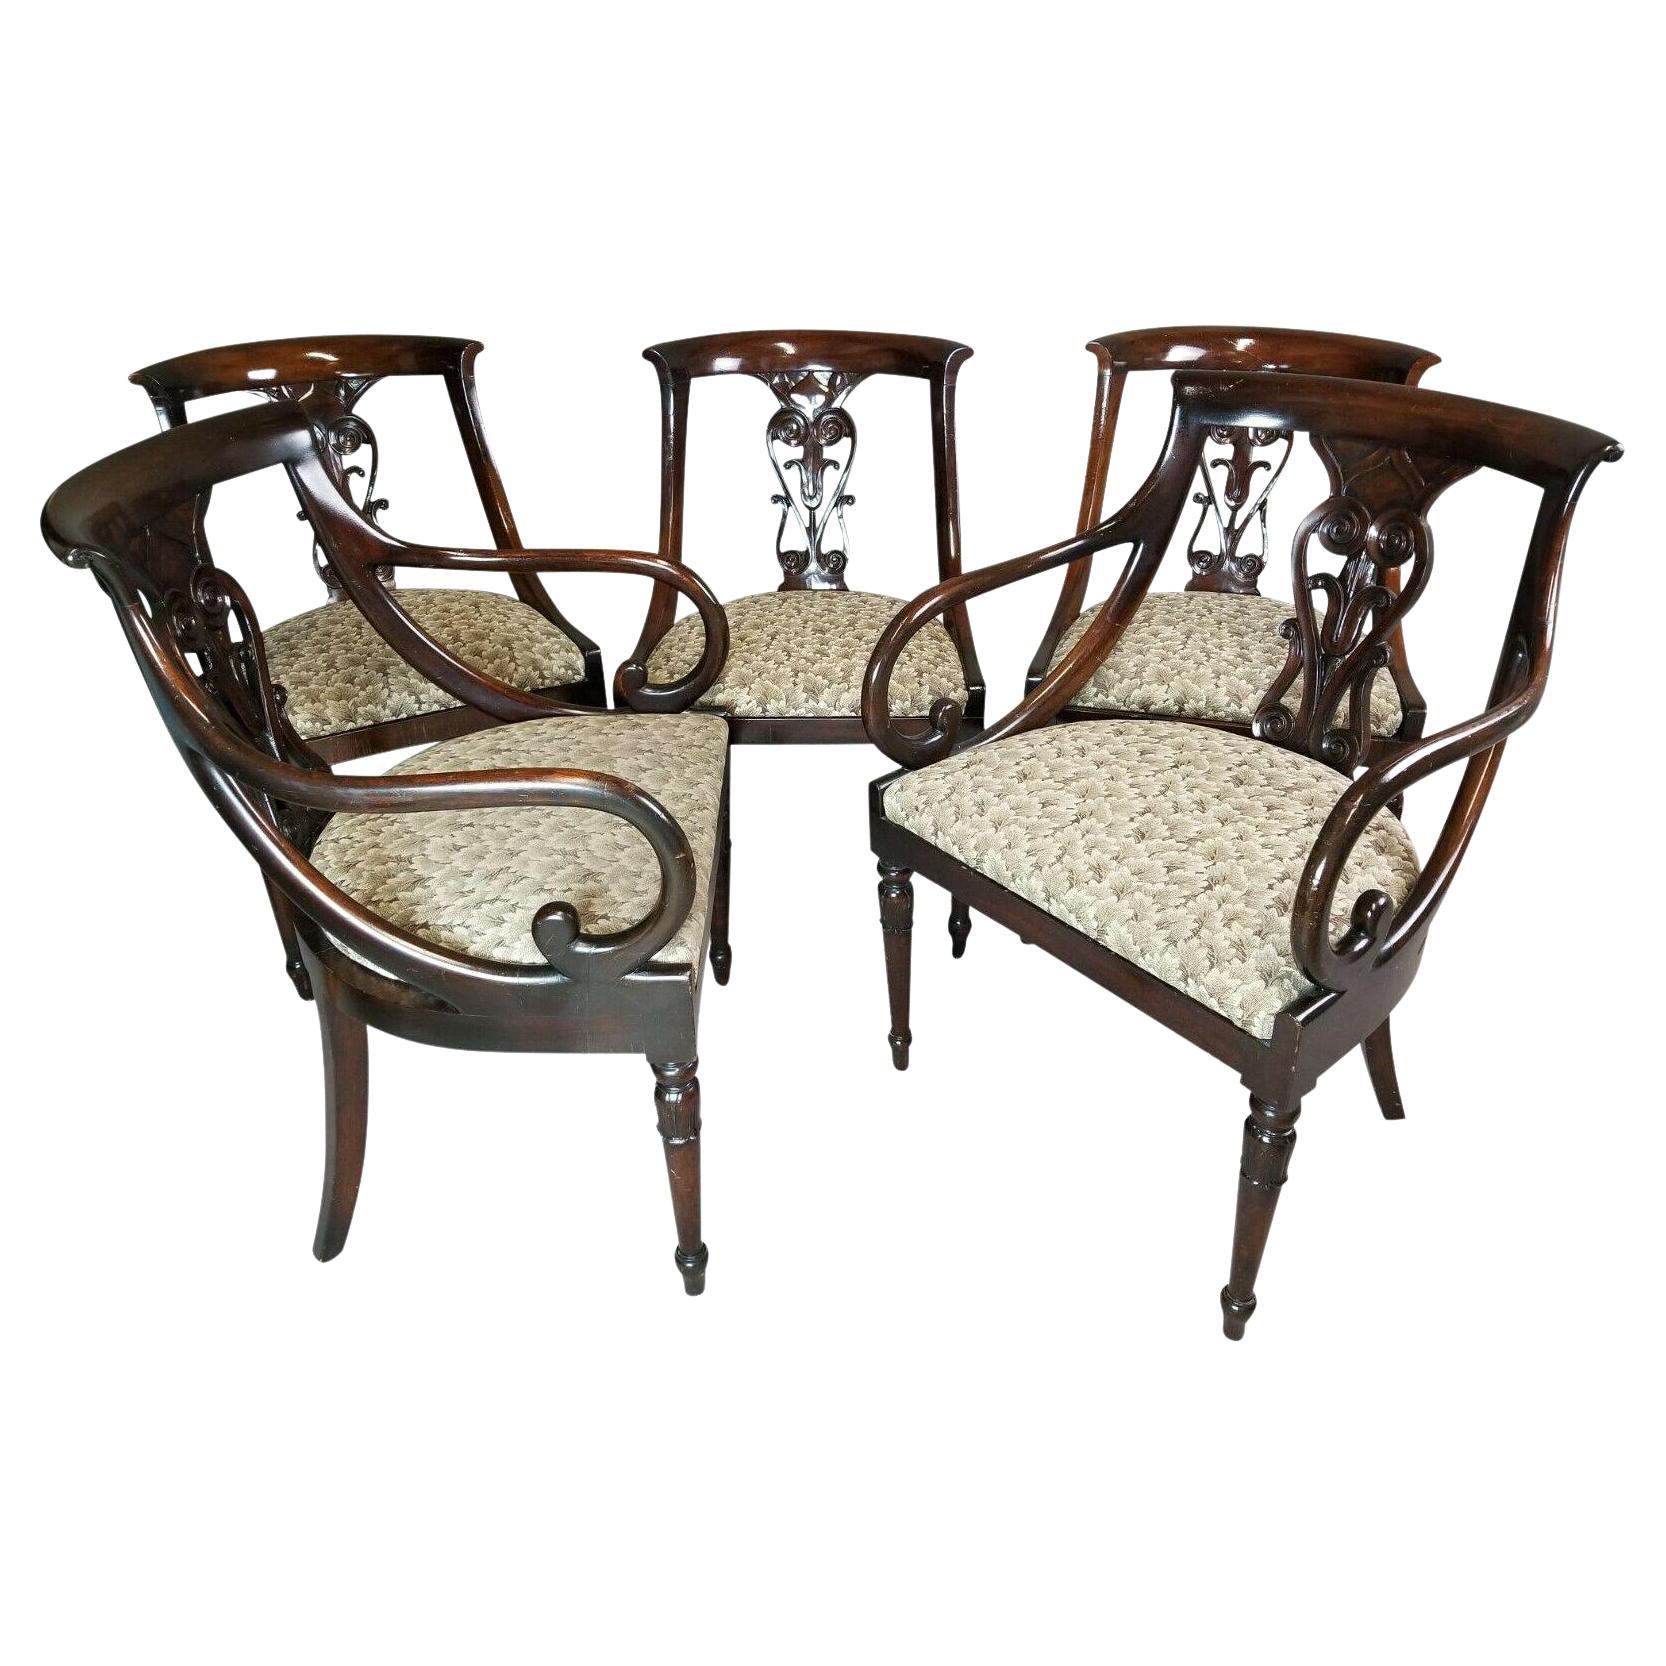 Antique English Regency Solid Mahogany Scroll Arm Dining Chairs, Set of 5